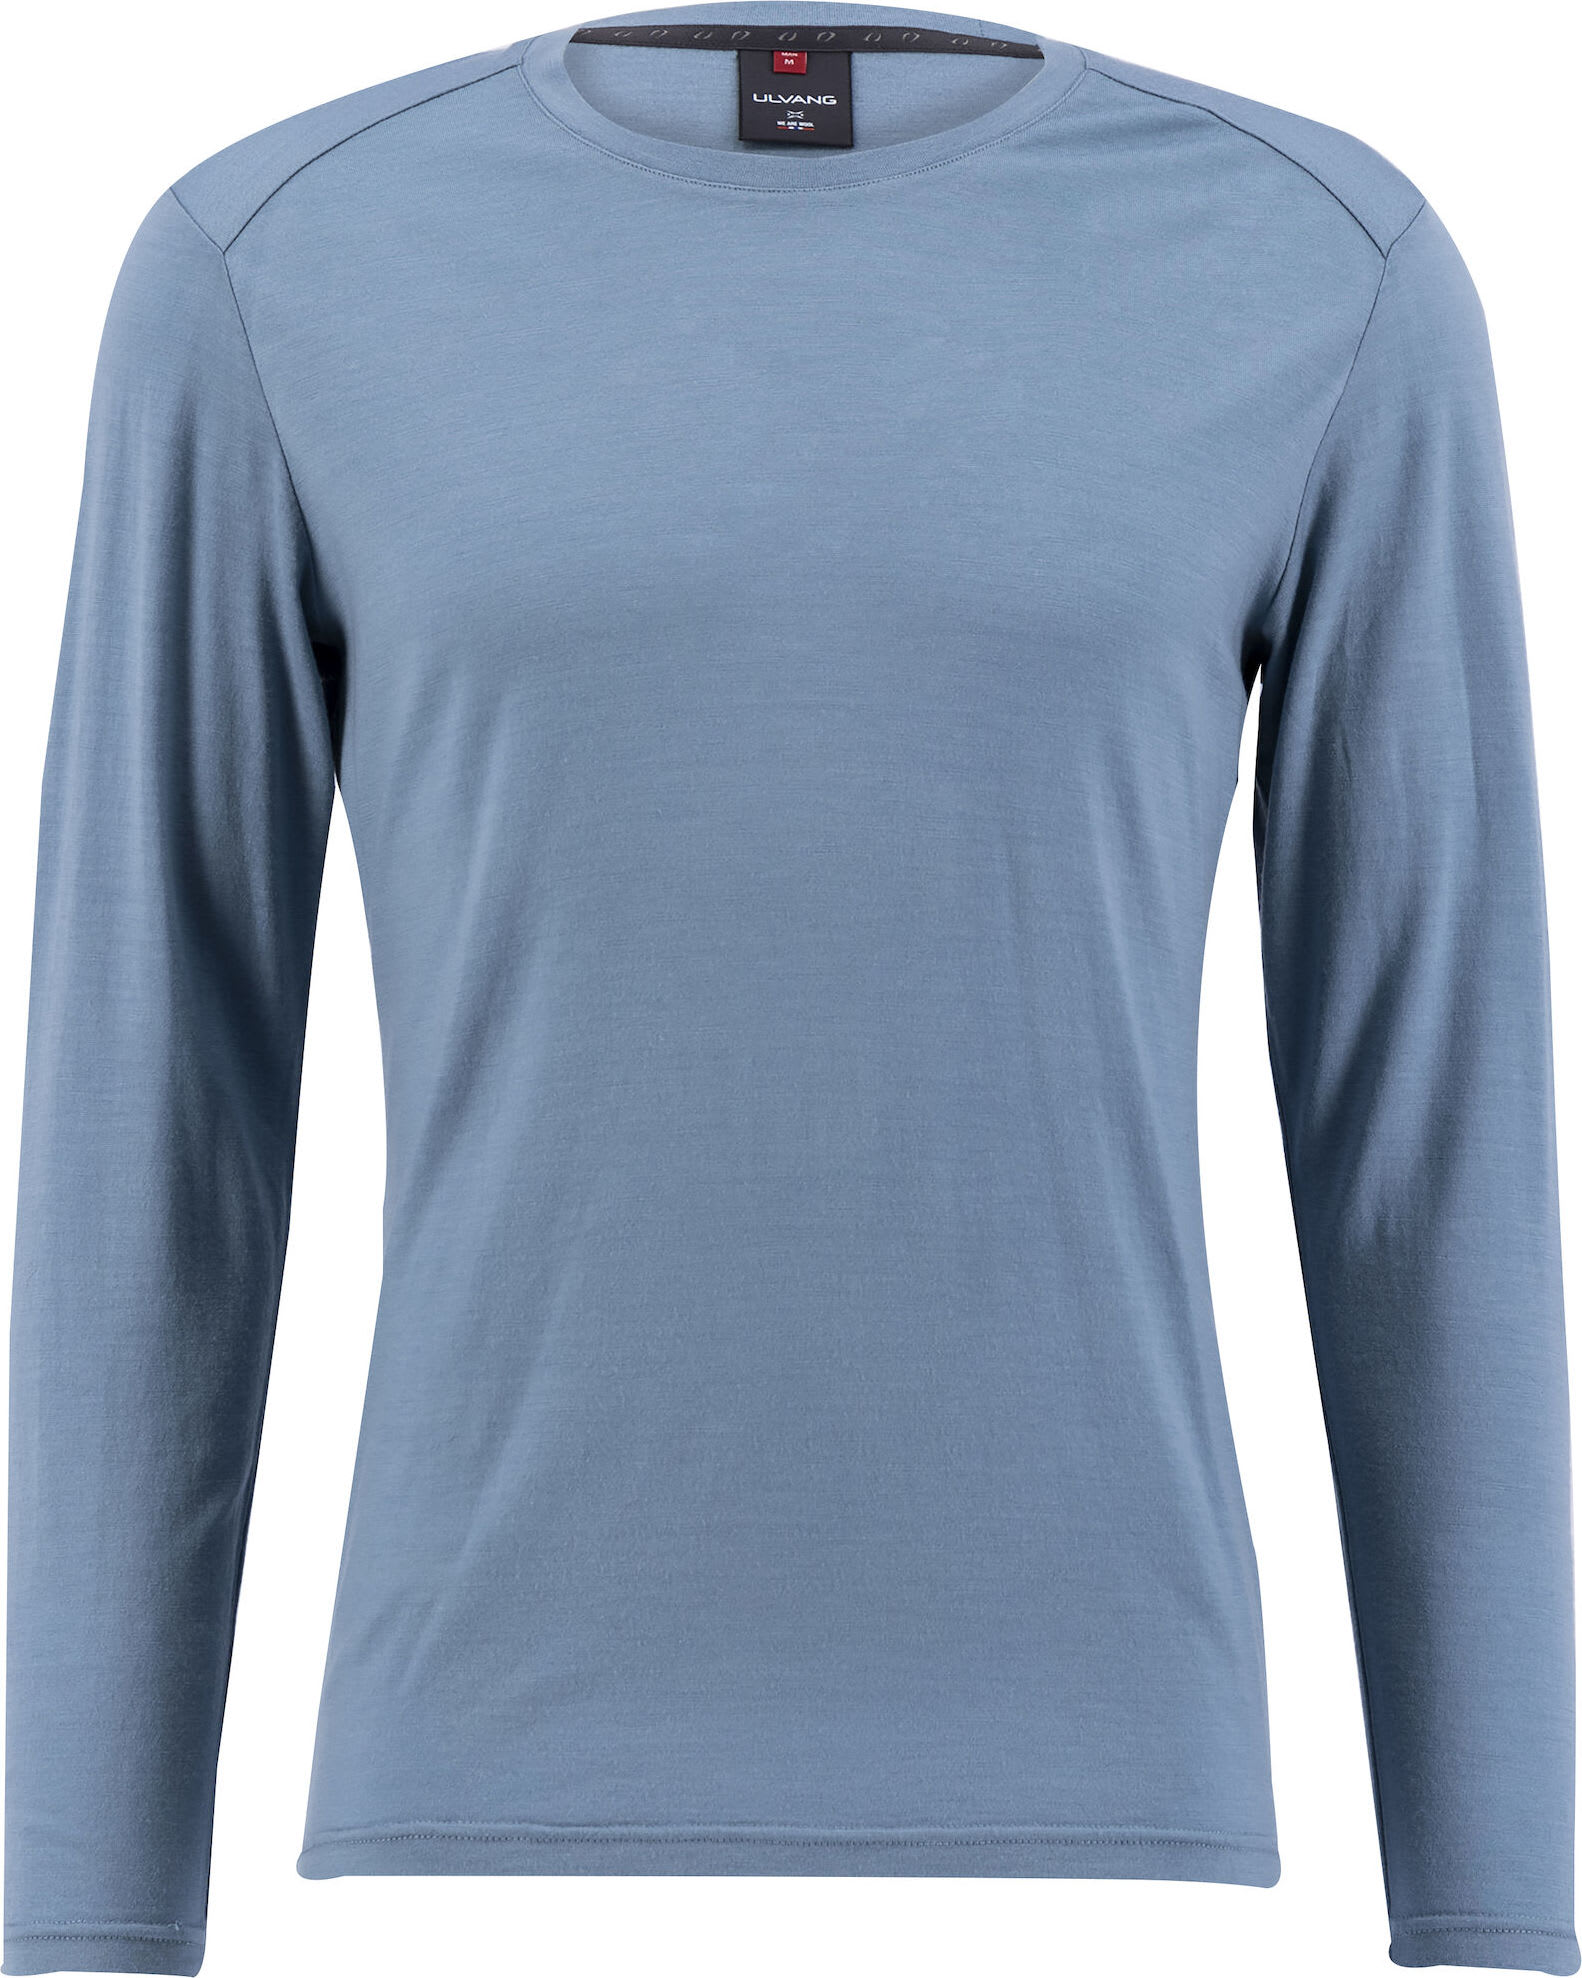 Buy Ulvang Men's Summer Wool Tee LS from Outnorth